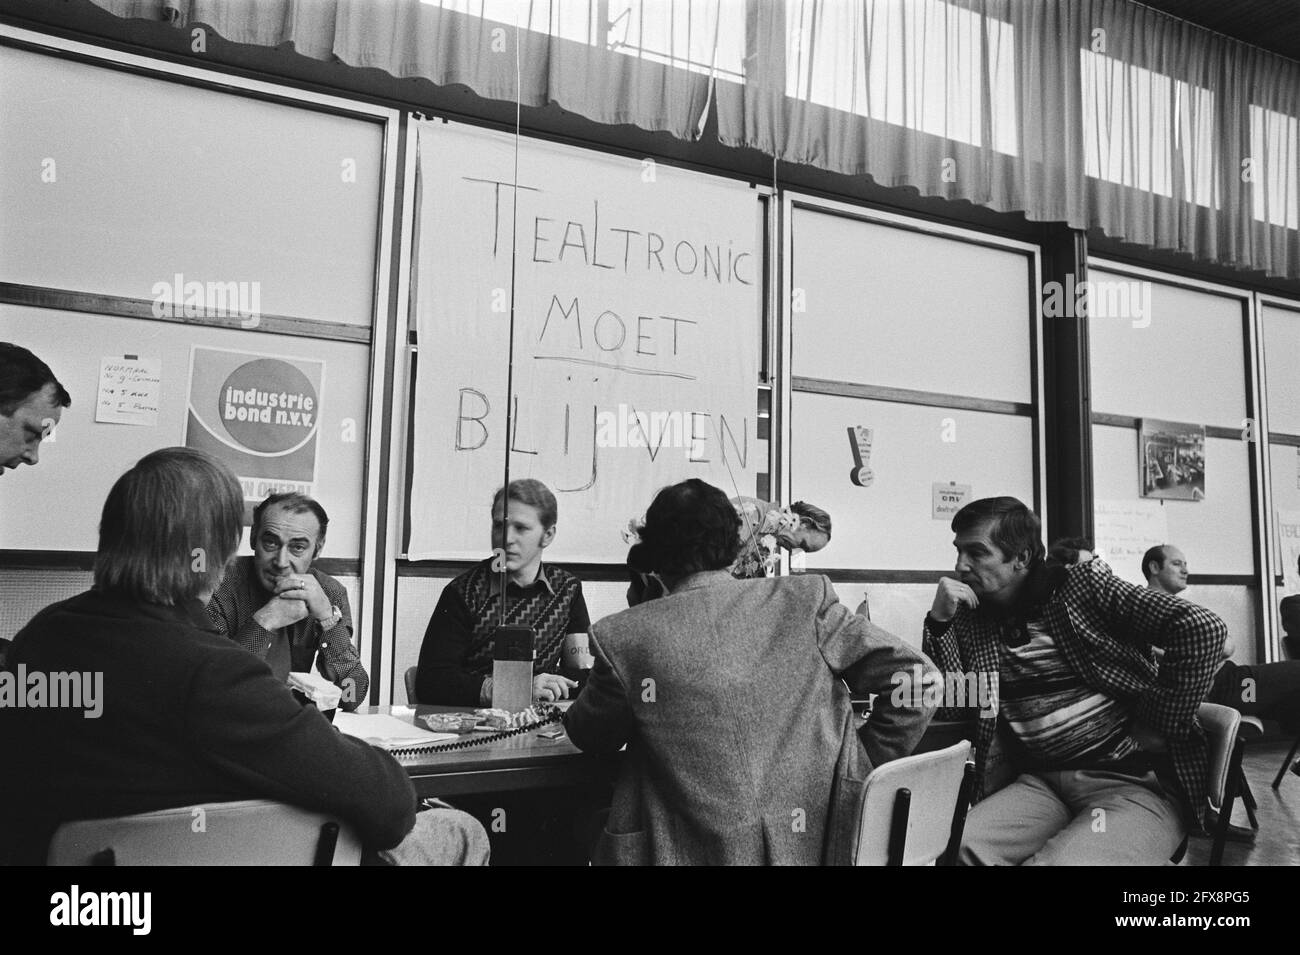 Occupation of Tealtronic; action center, January 10, 1977, CONSTITUTION, The Netherlands, 20th century press agency photo, news to remember, documentary, historic photography 1945-1990, visual stories, human history of the Twentieth Century, capturing moments in time Stock Photo